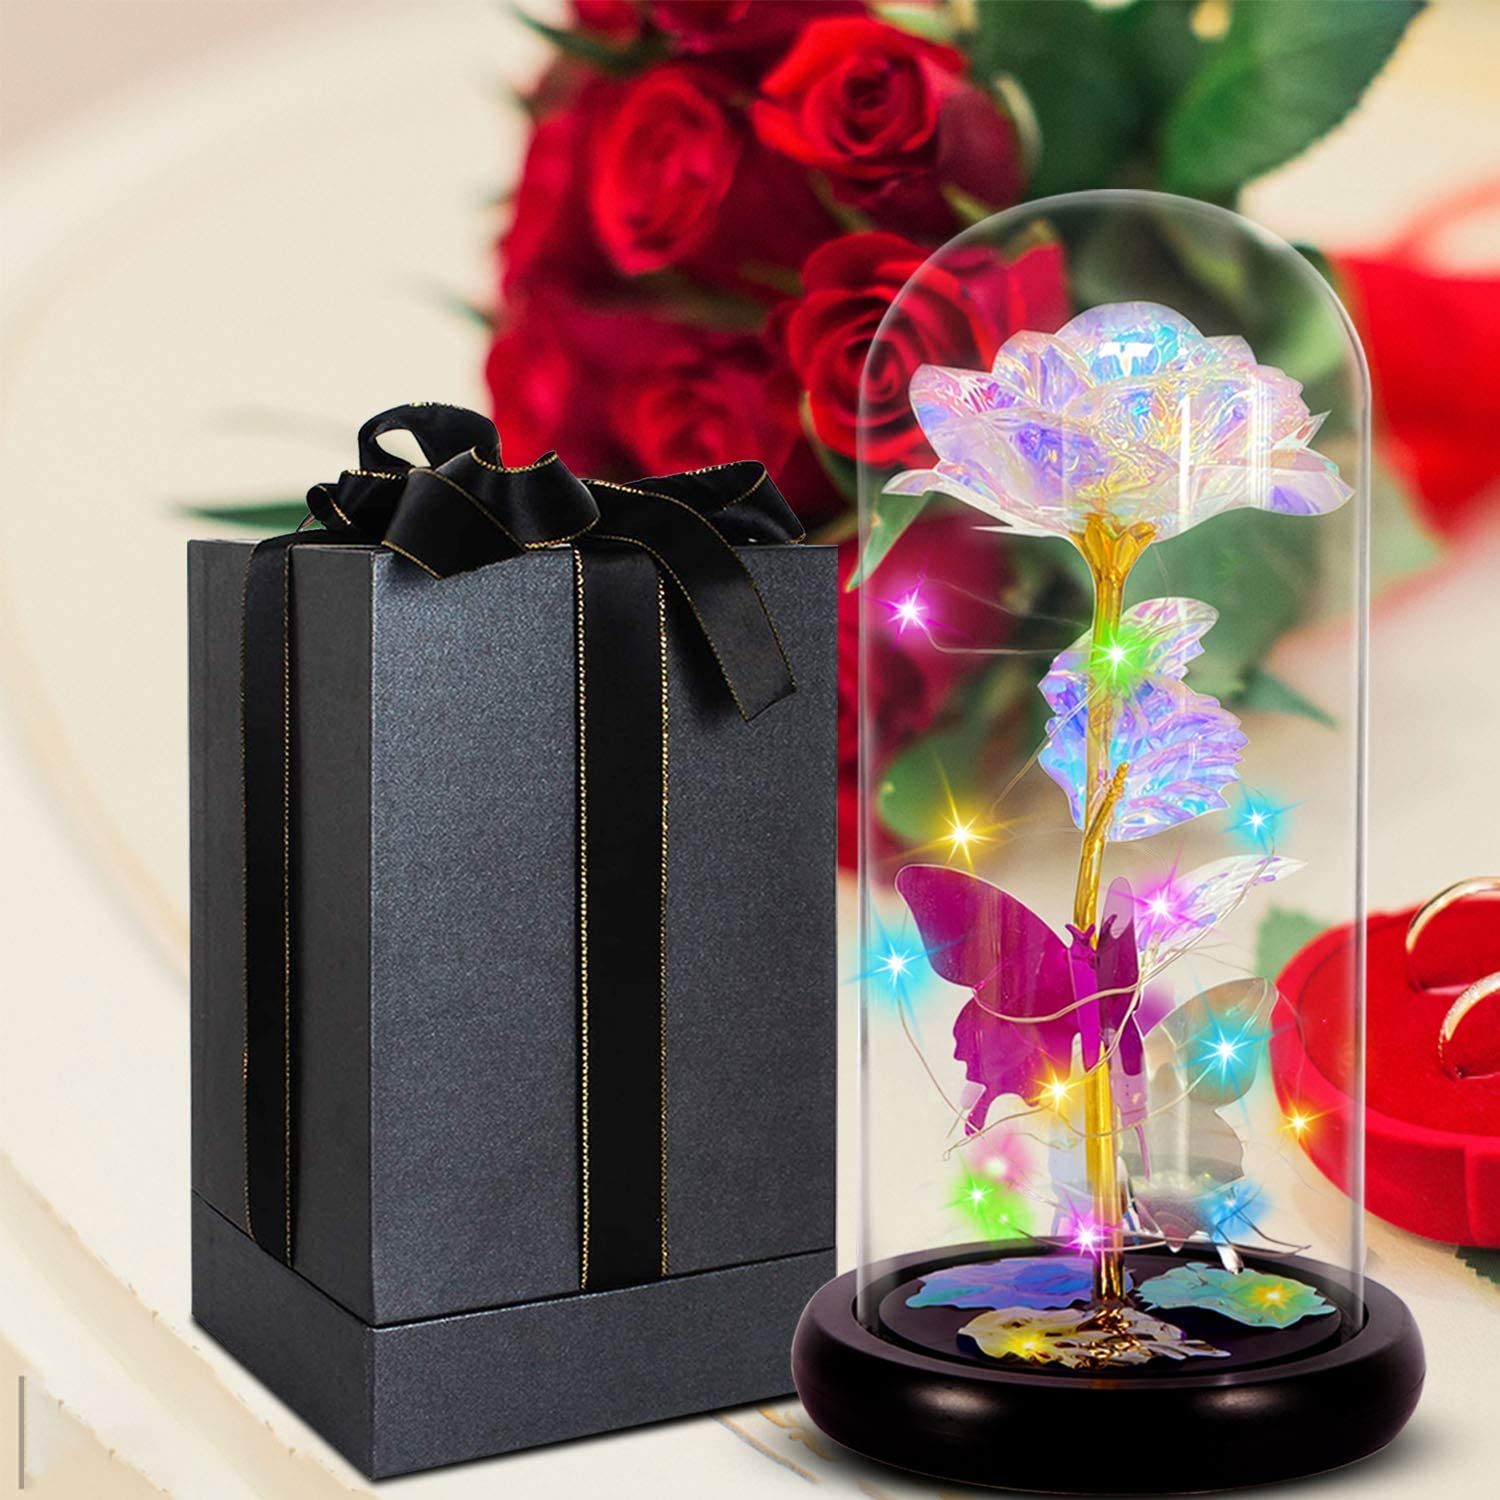 A ModernMazing Valentines Day Gifts for Her Rose Gifts,Love Flower Galaxy Rose with Led Decor in Glass Dome Valentines Gifts,Unique Gifts for Her next to a gift box.